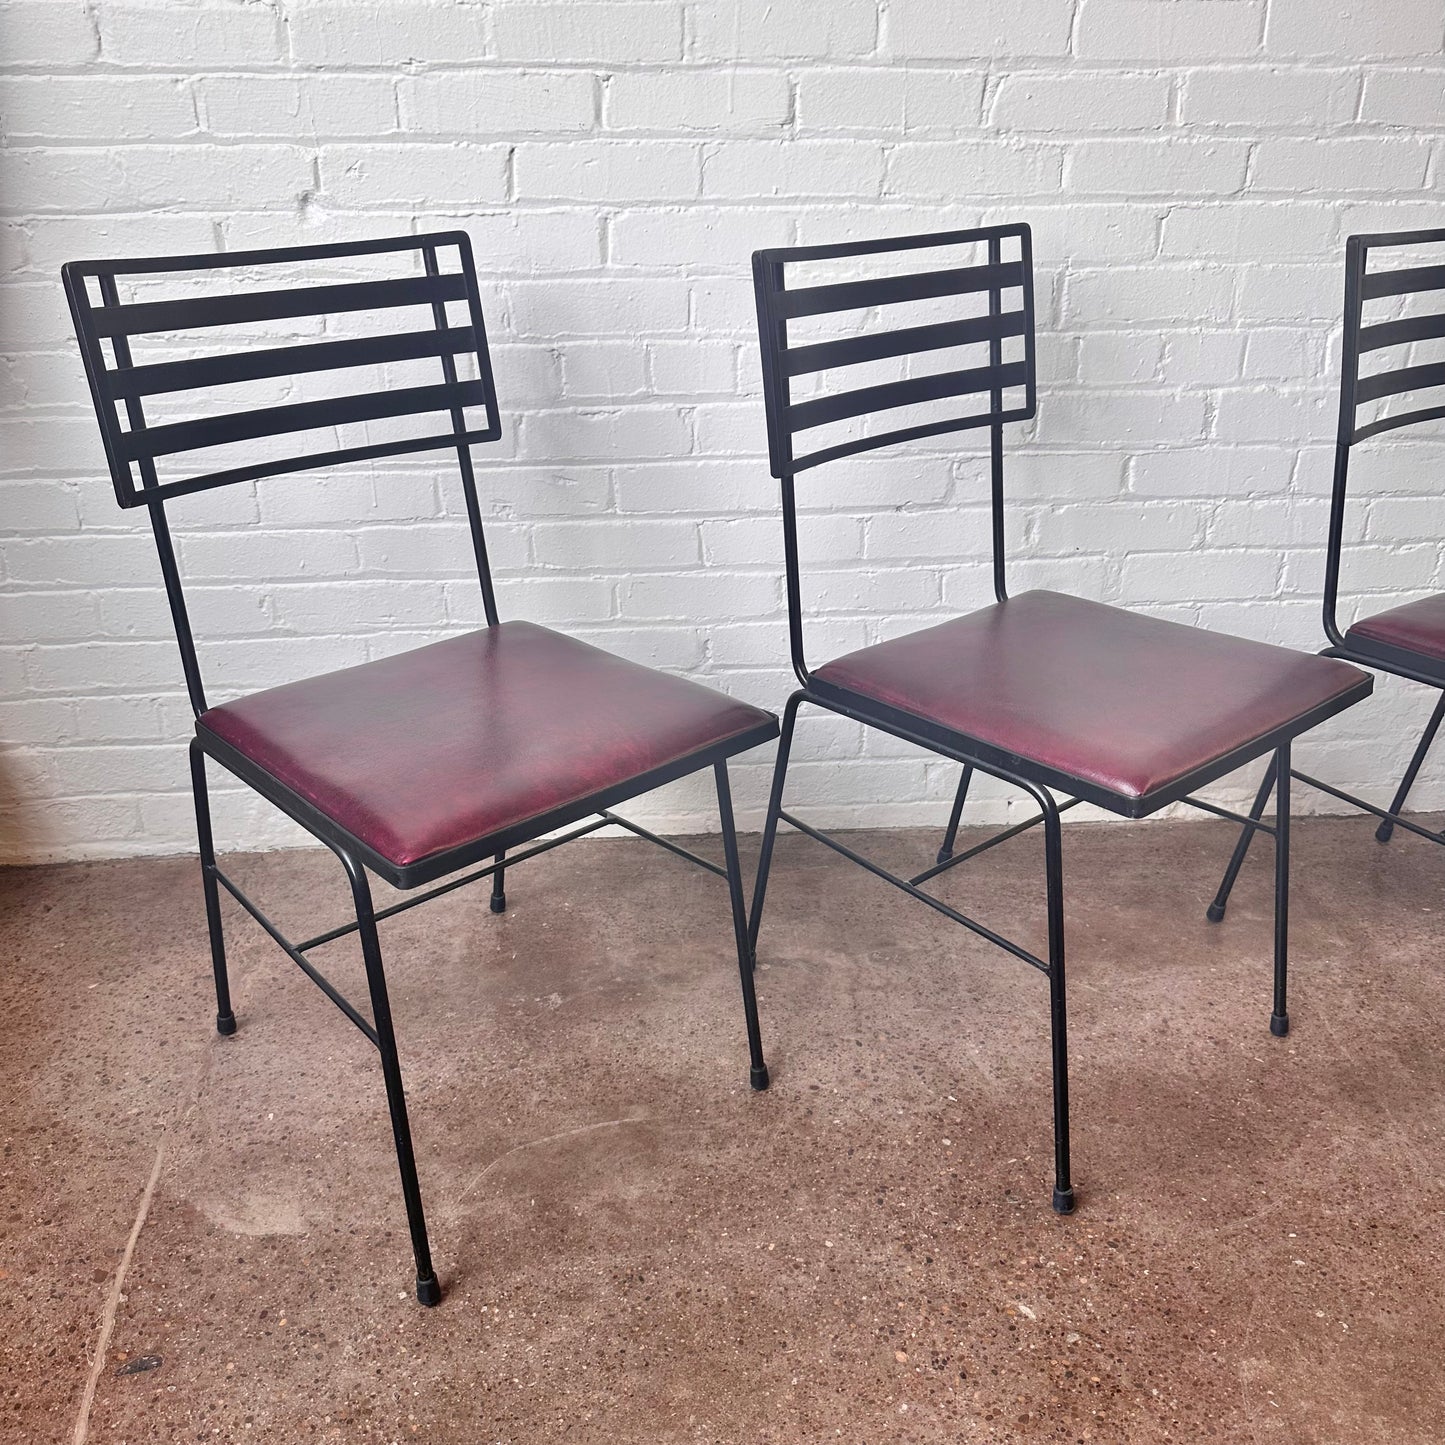 TONY PAUL STYLE WROUGHT IRON OUTDOOR CHAIRS - SET OF 4